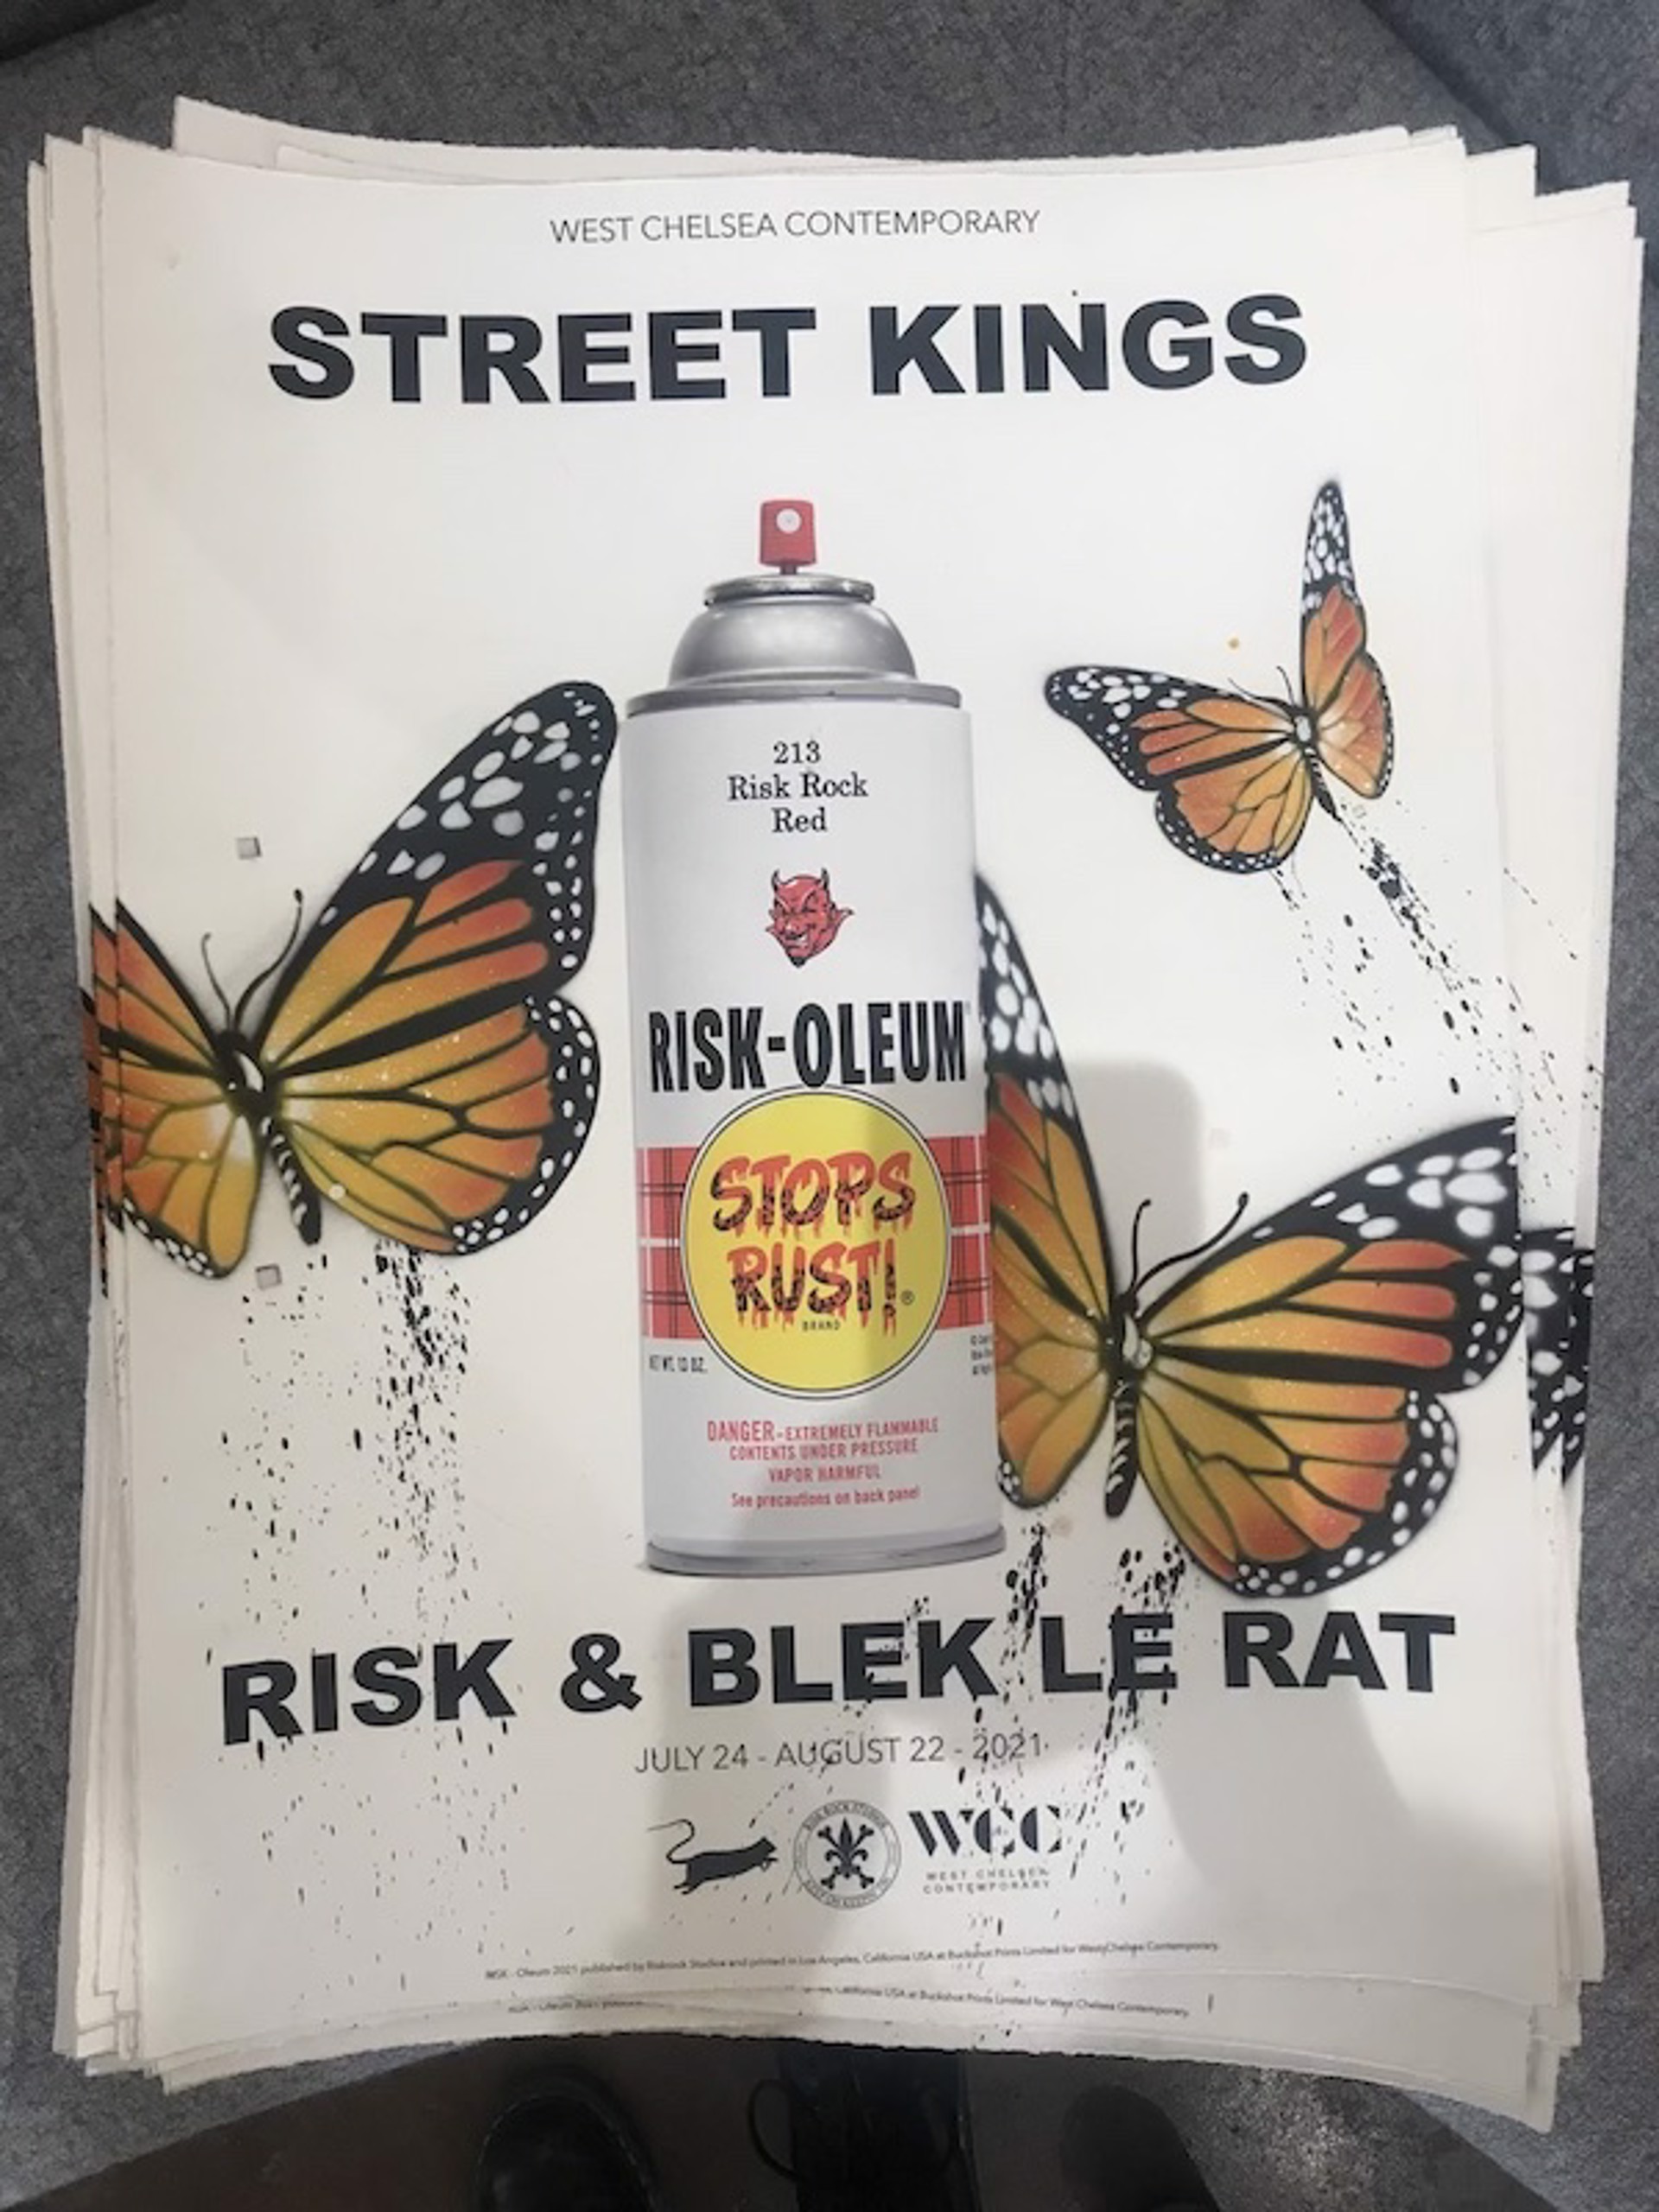 Street Kings Show Print (19/50) by Risk